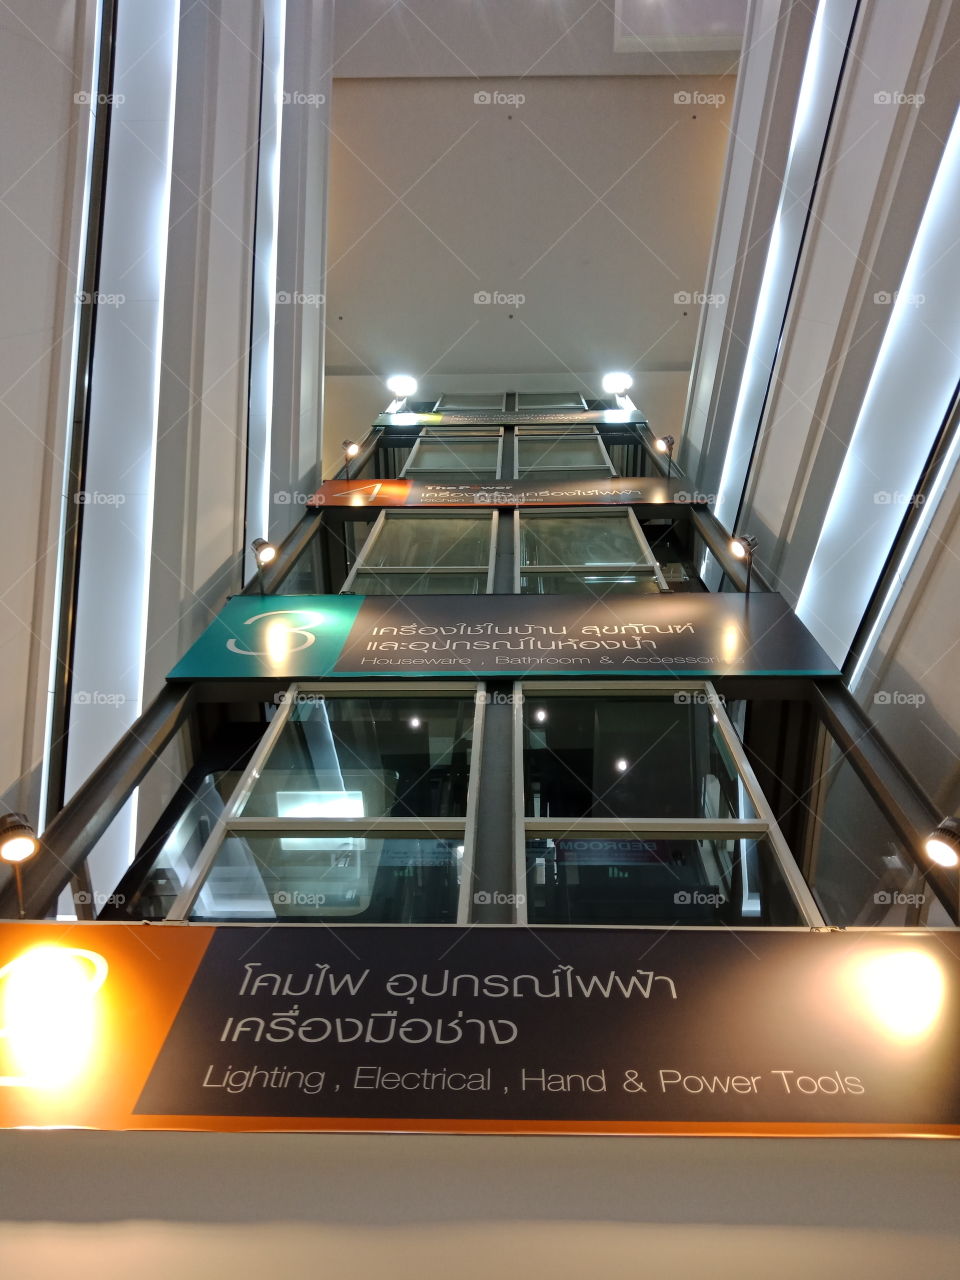 The perspective view of elevators